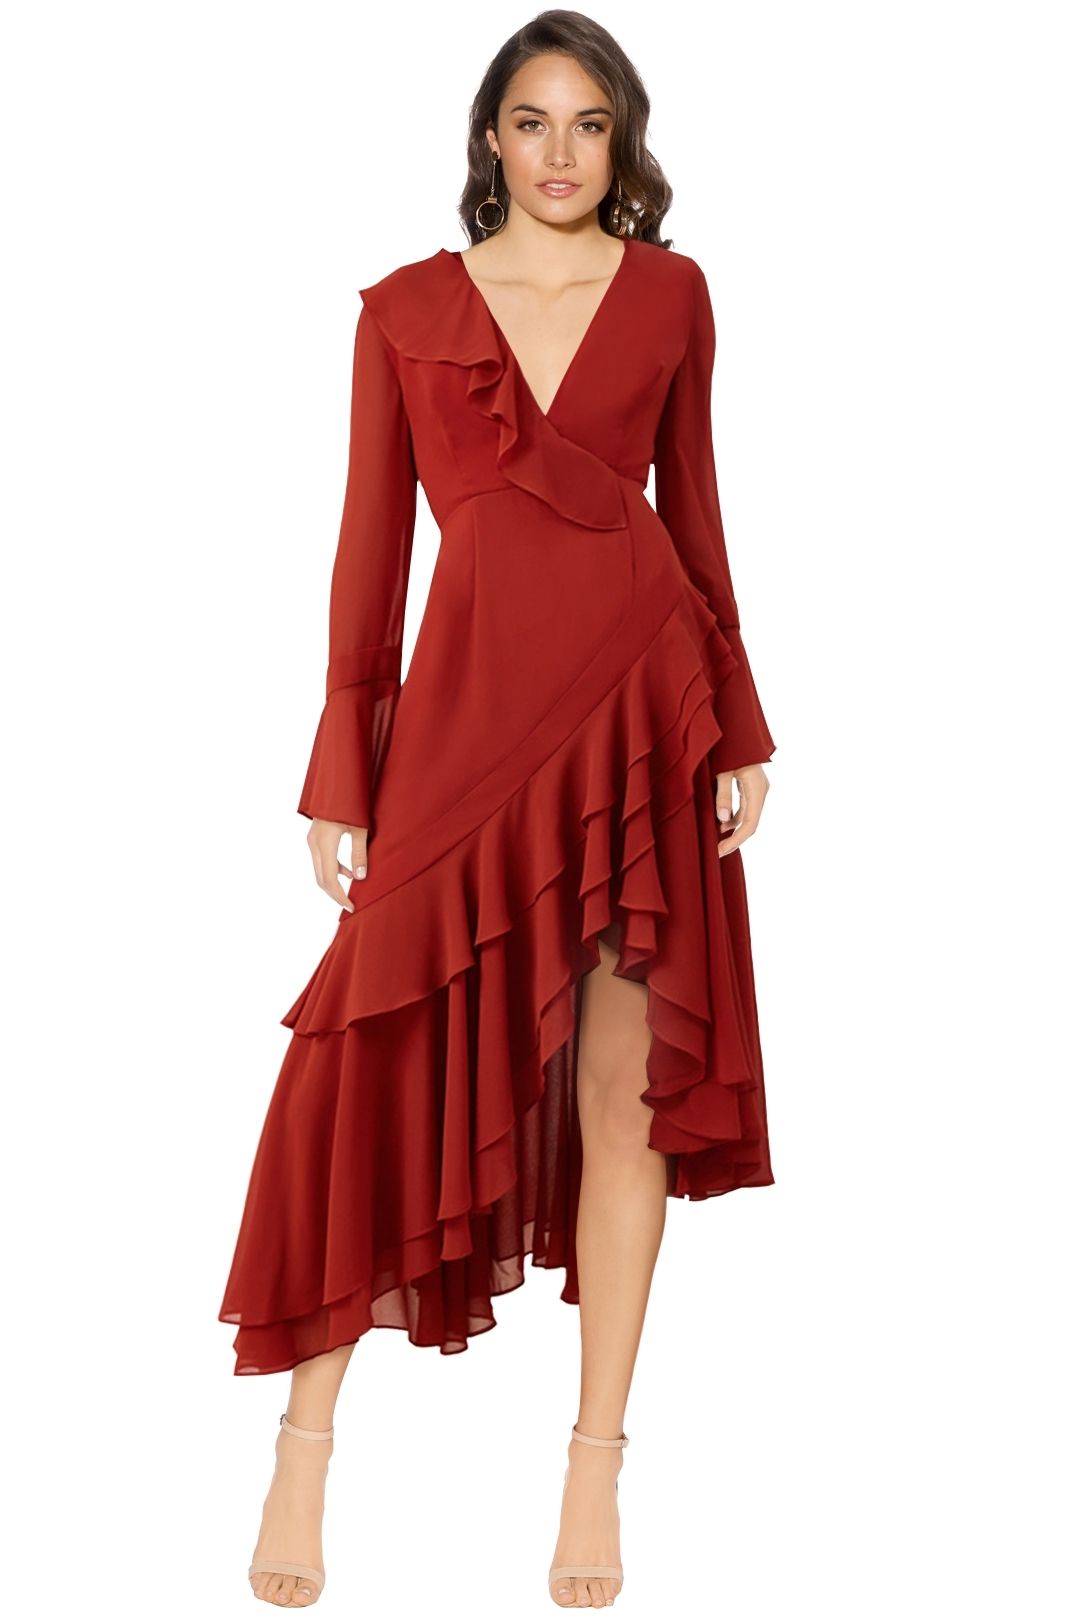 C/MEO Collective - Allude Long Sleeve Dress - Red - Front